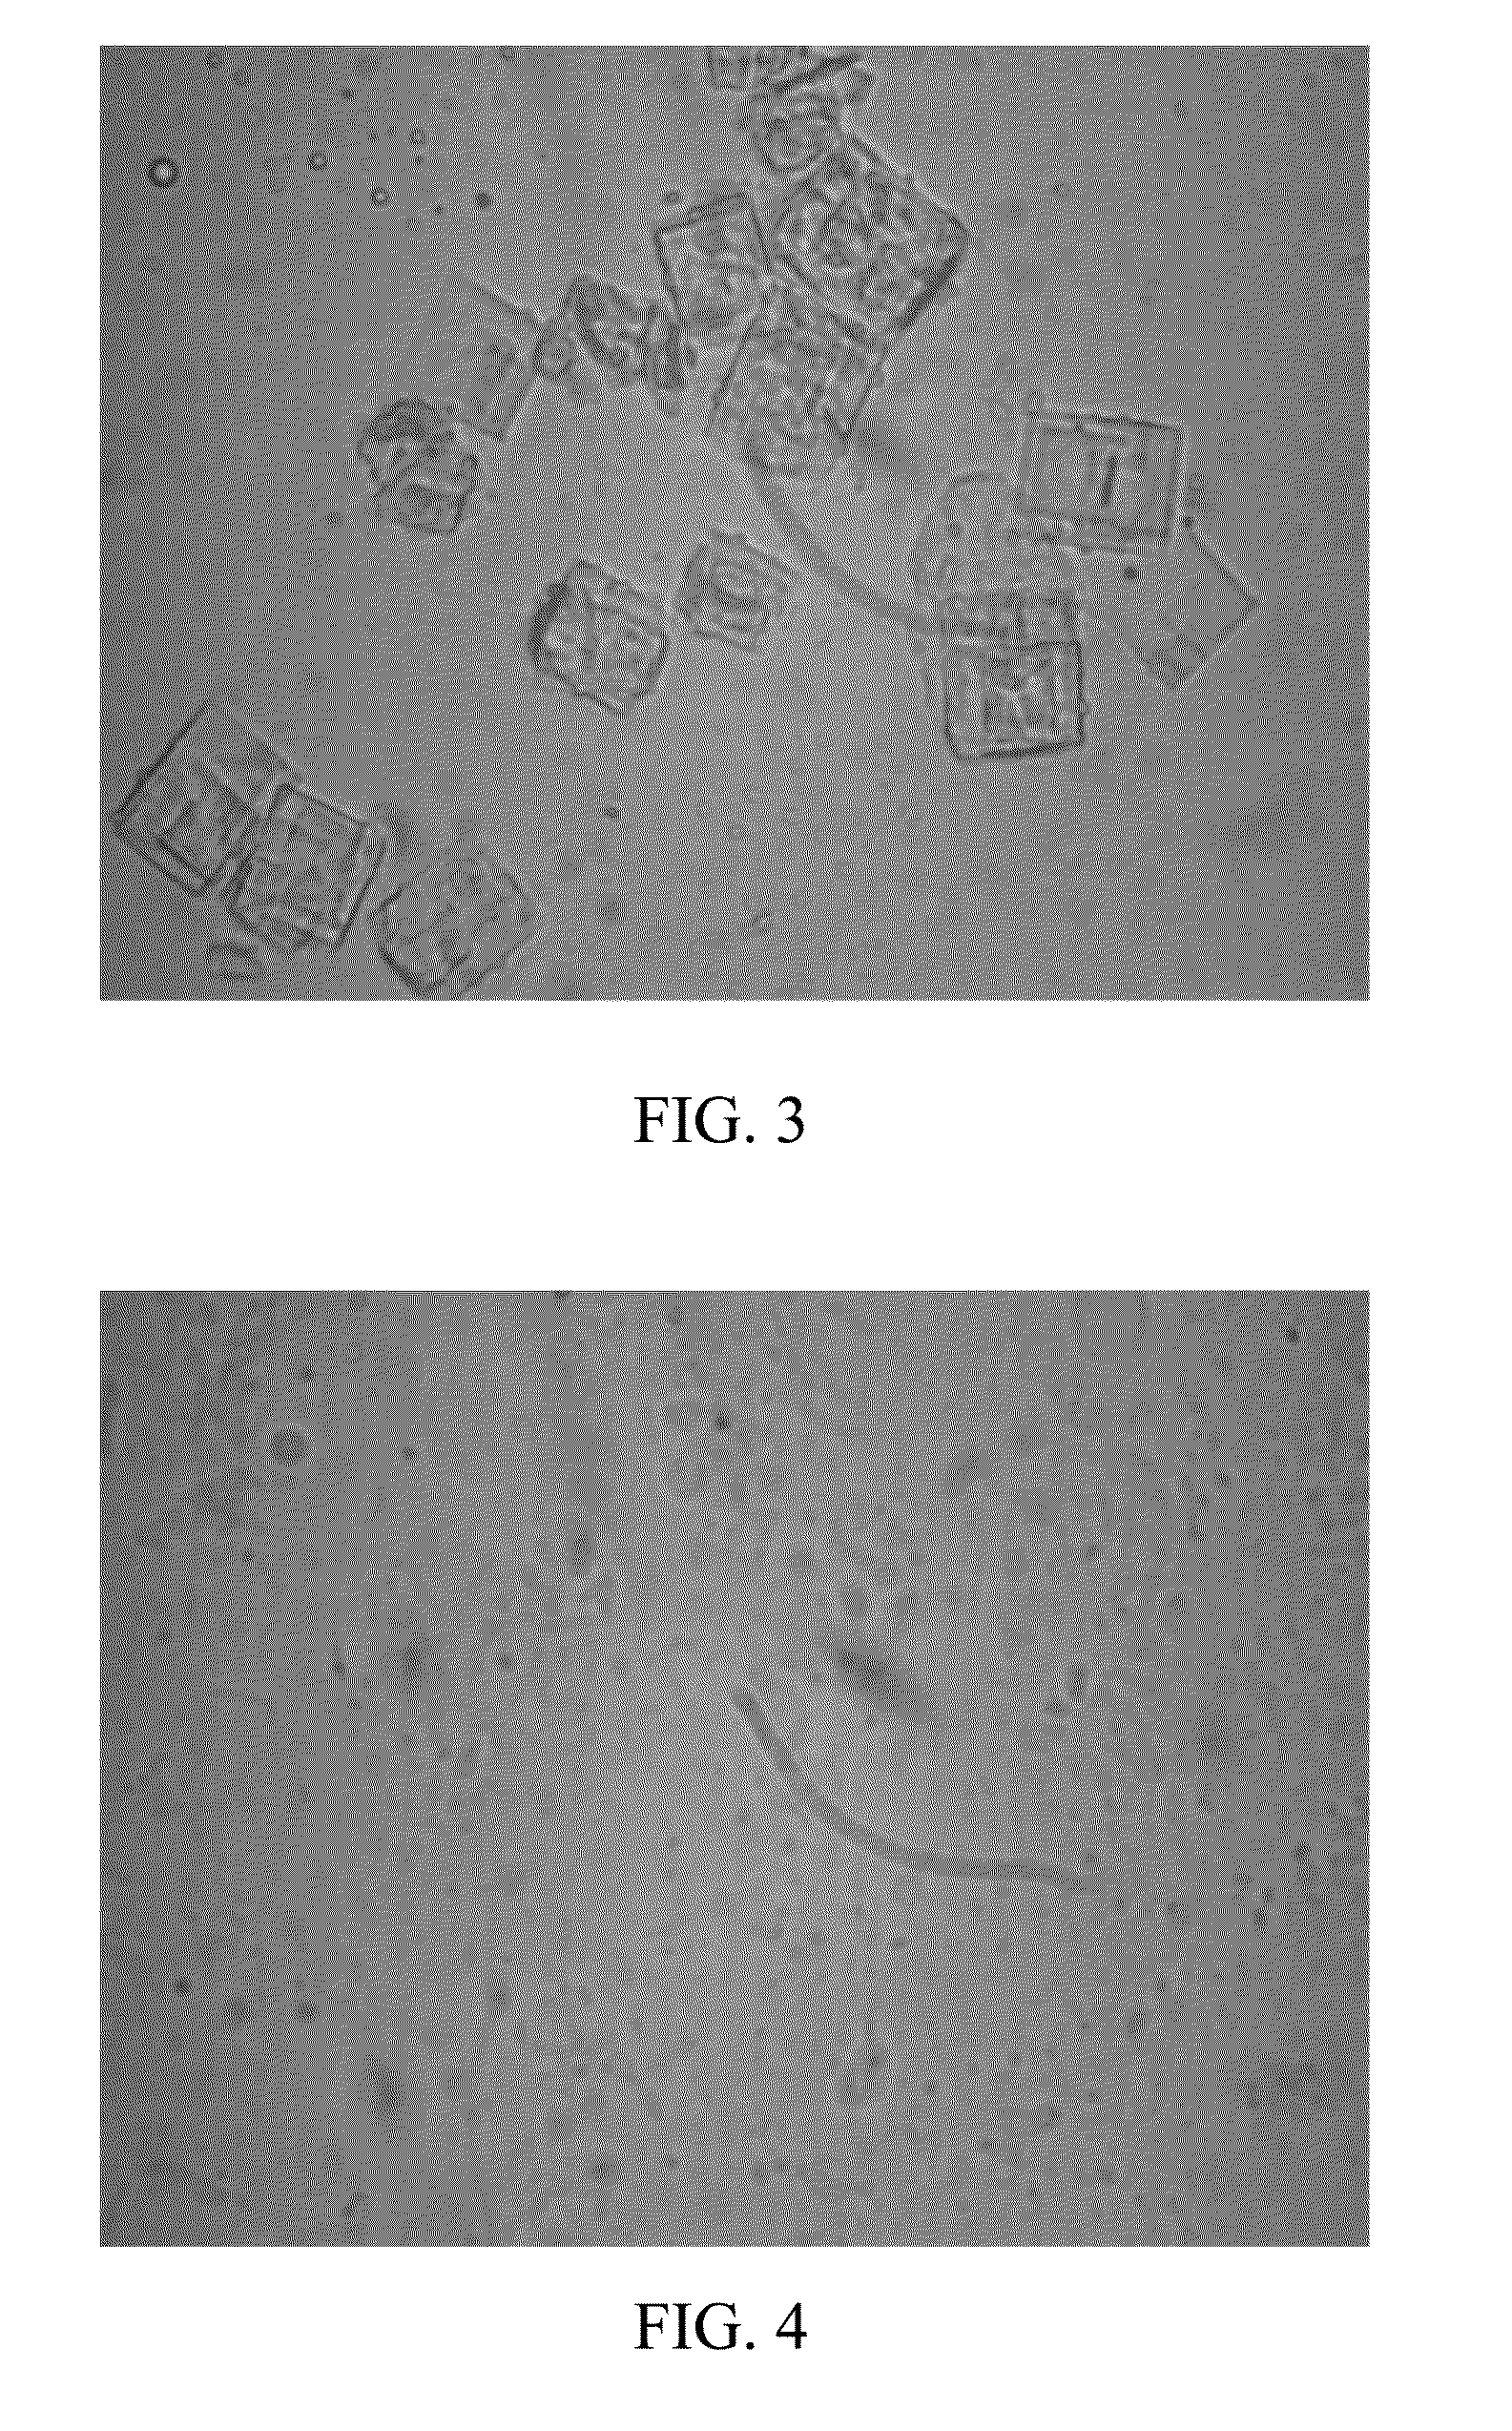 Liquid Compositions of Insoluble Drugs and Preparation Methods Thereof